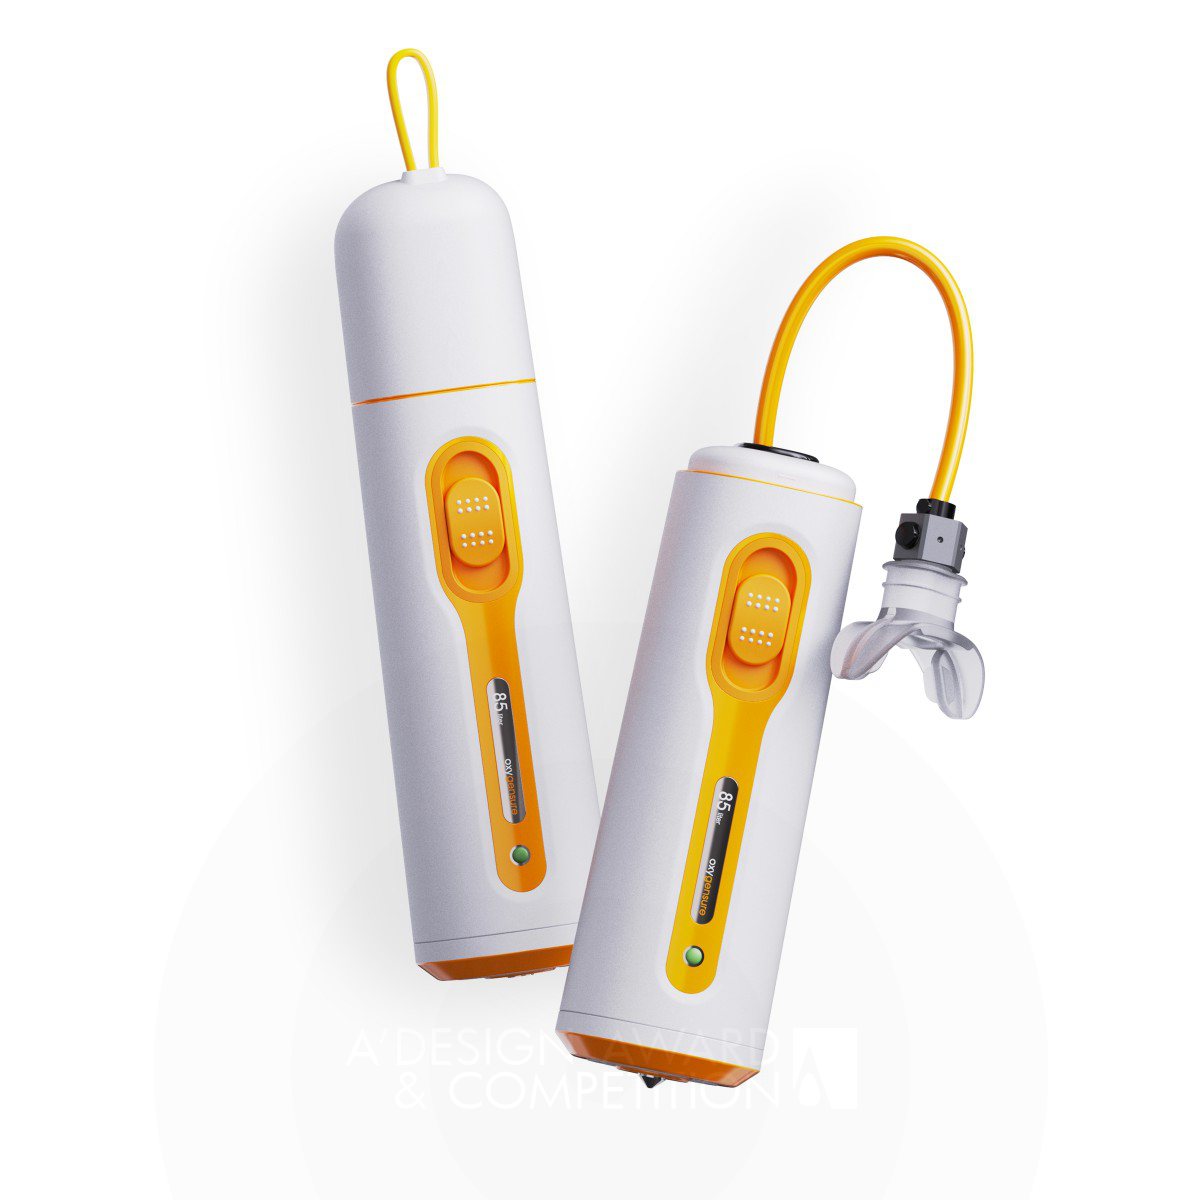 Oxygensure Rescue Bottle with Oxygen Cylinder  by Jianing Dong